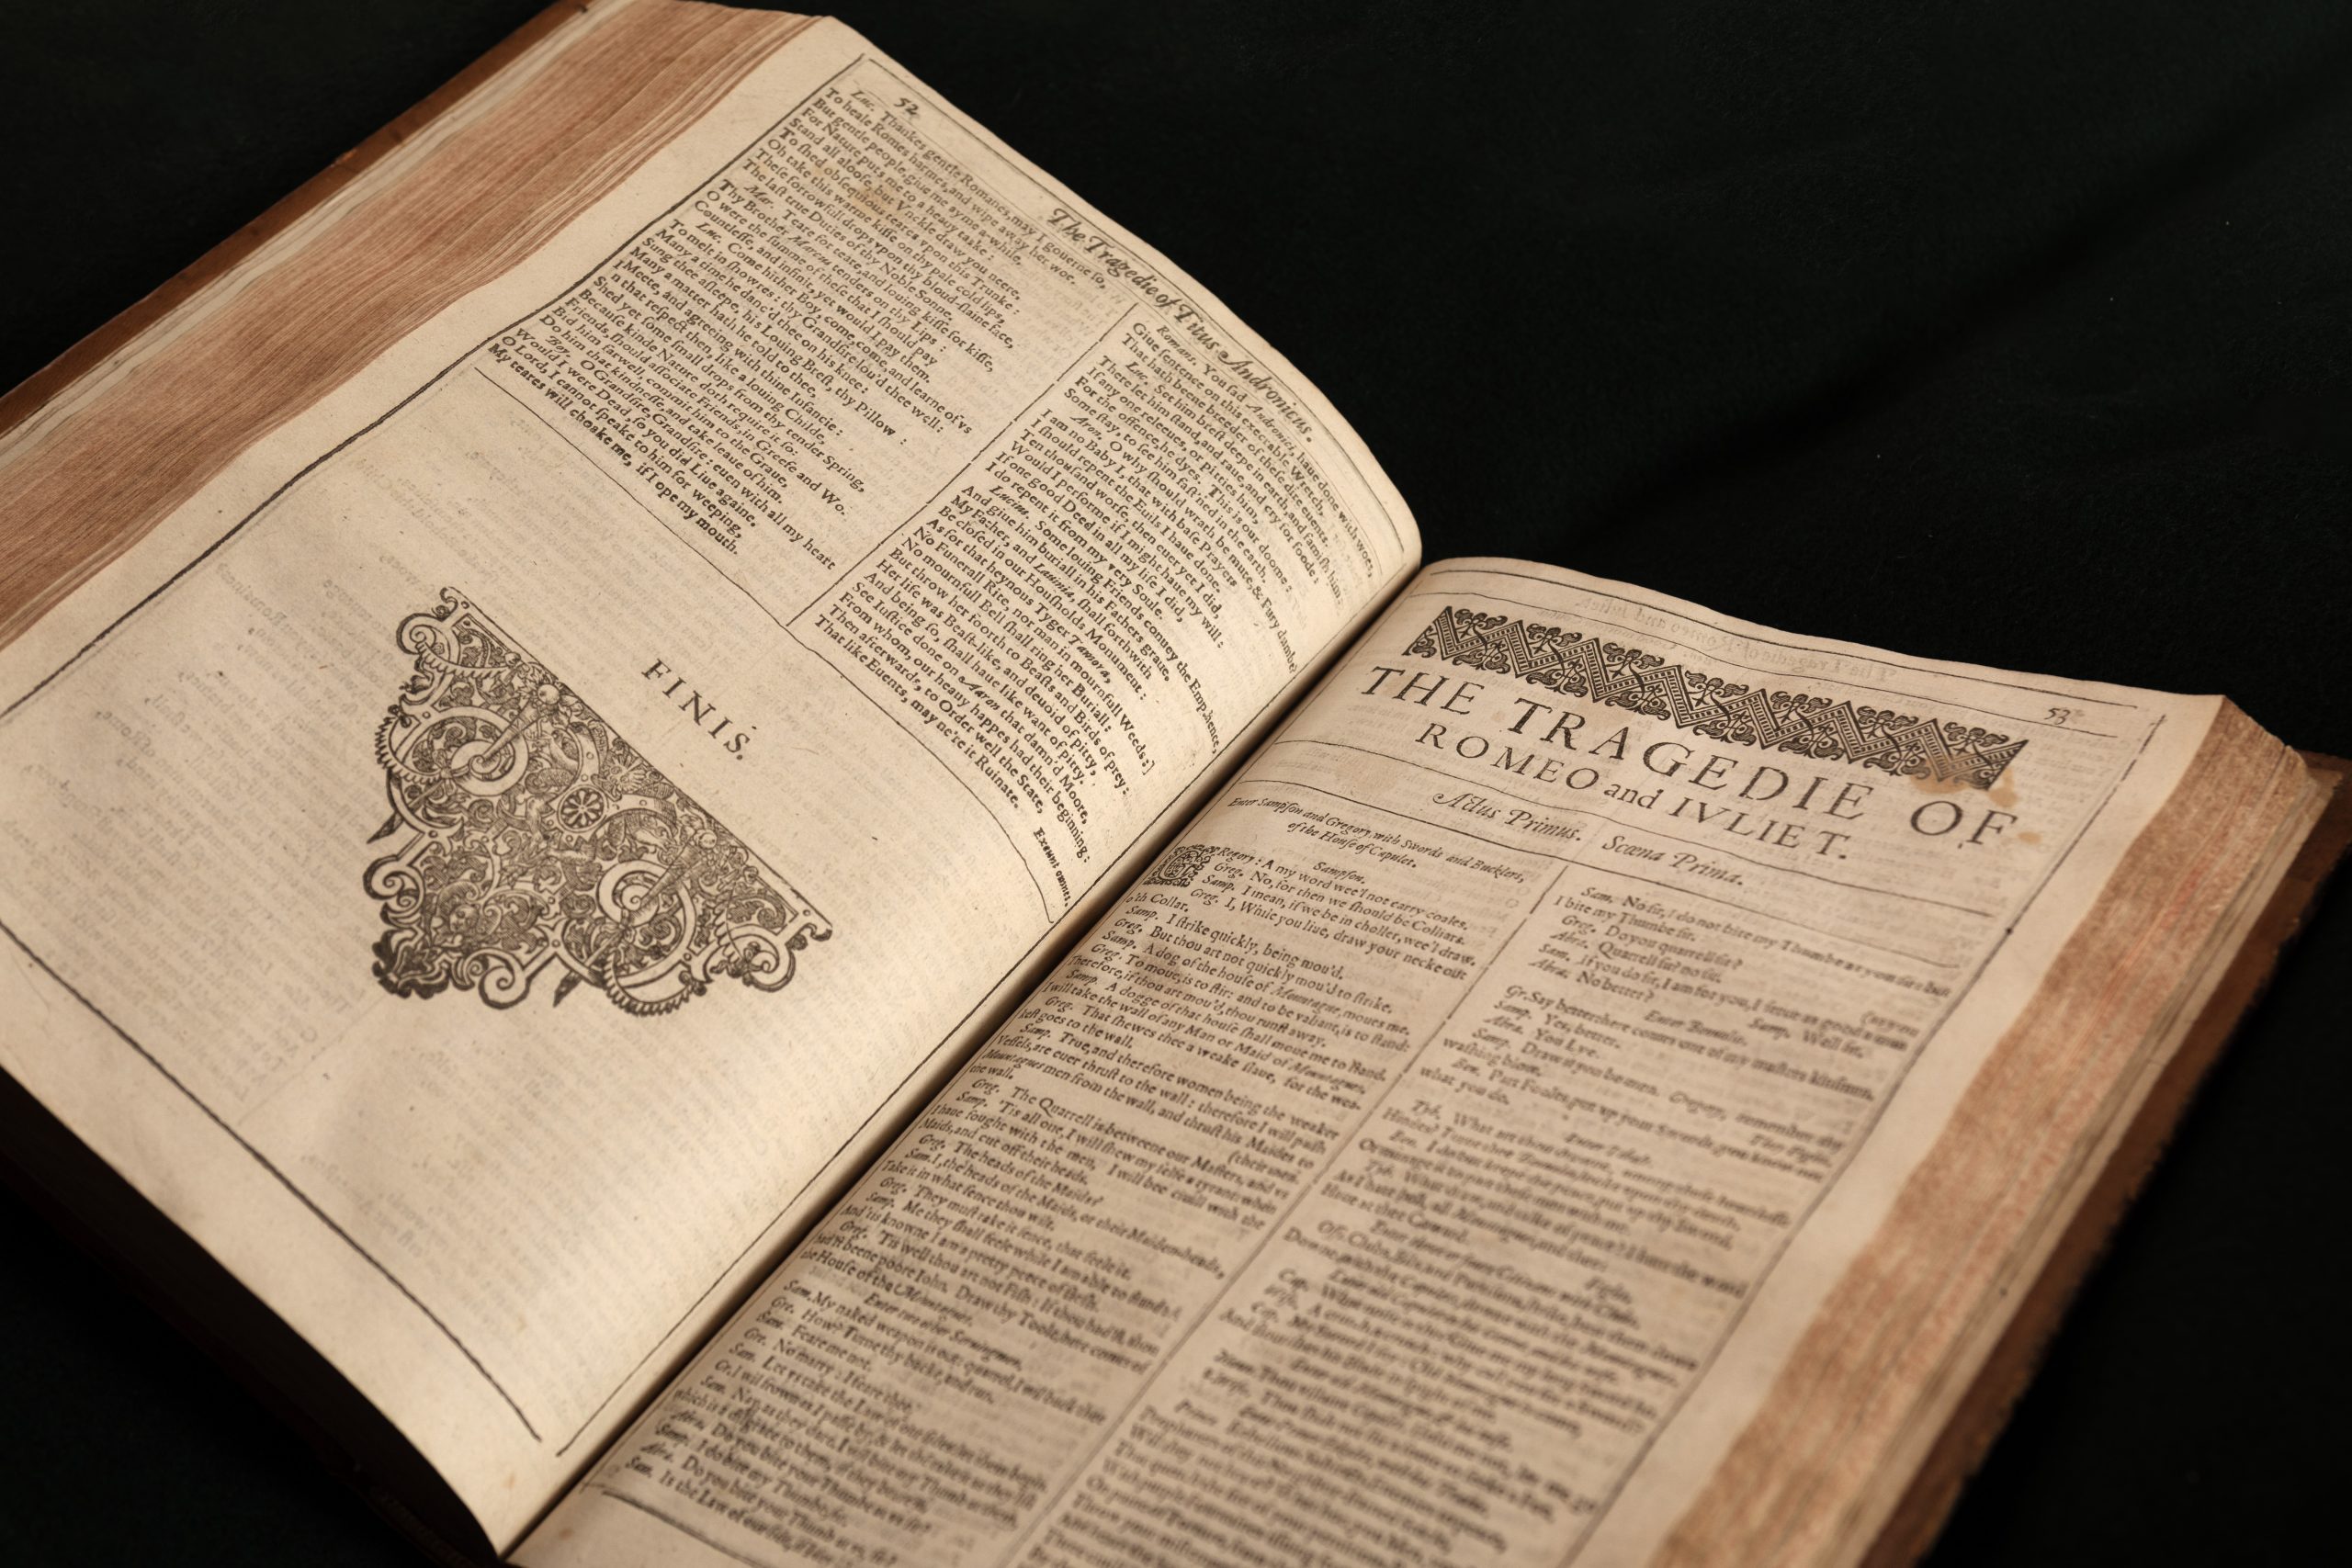 Two pages from the First Folio.